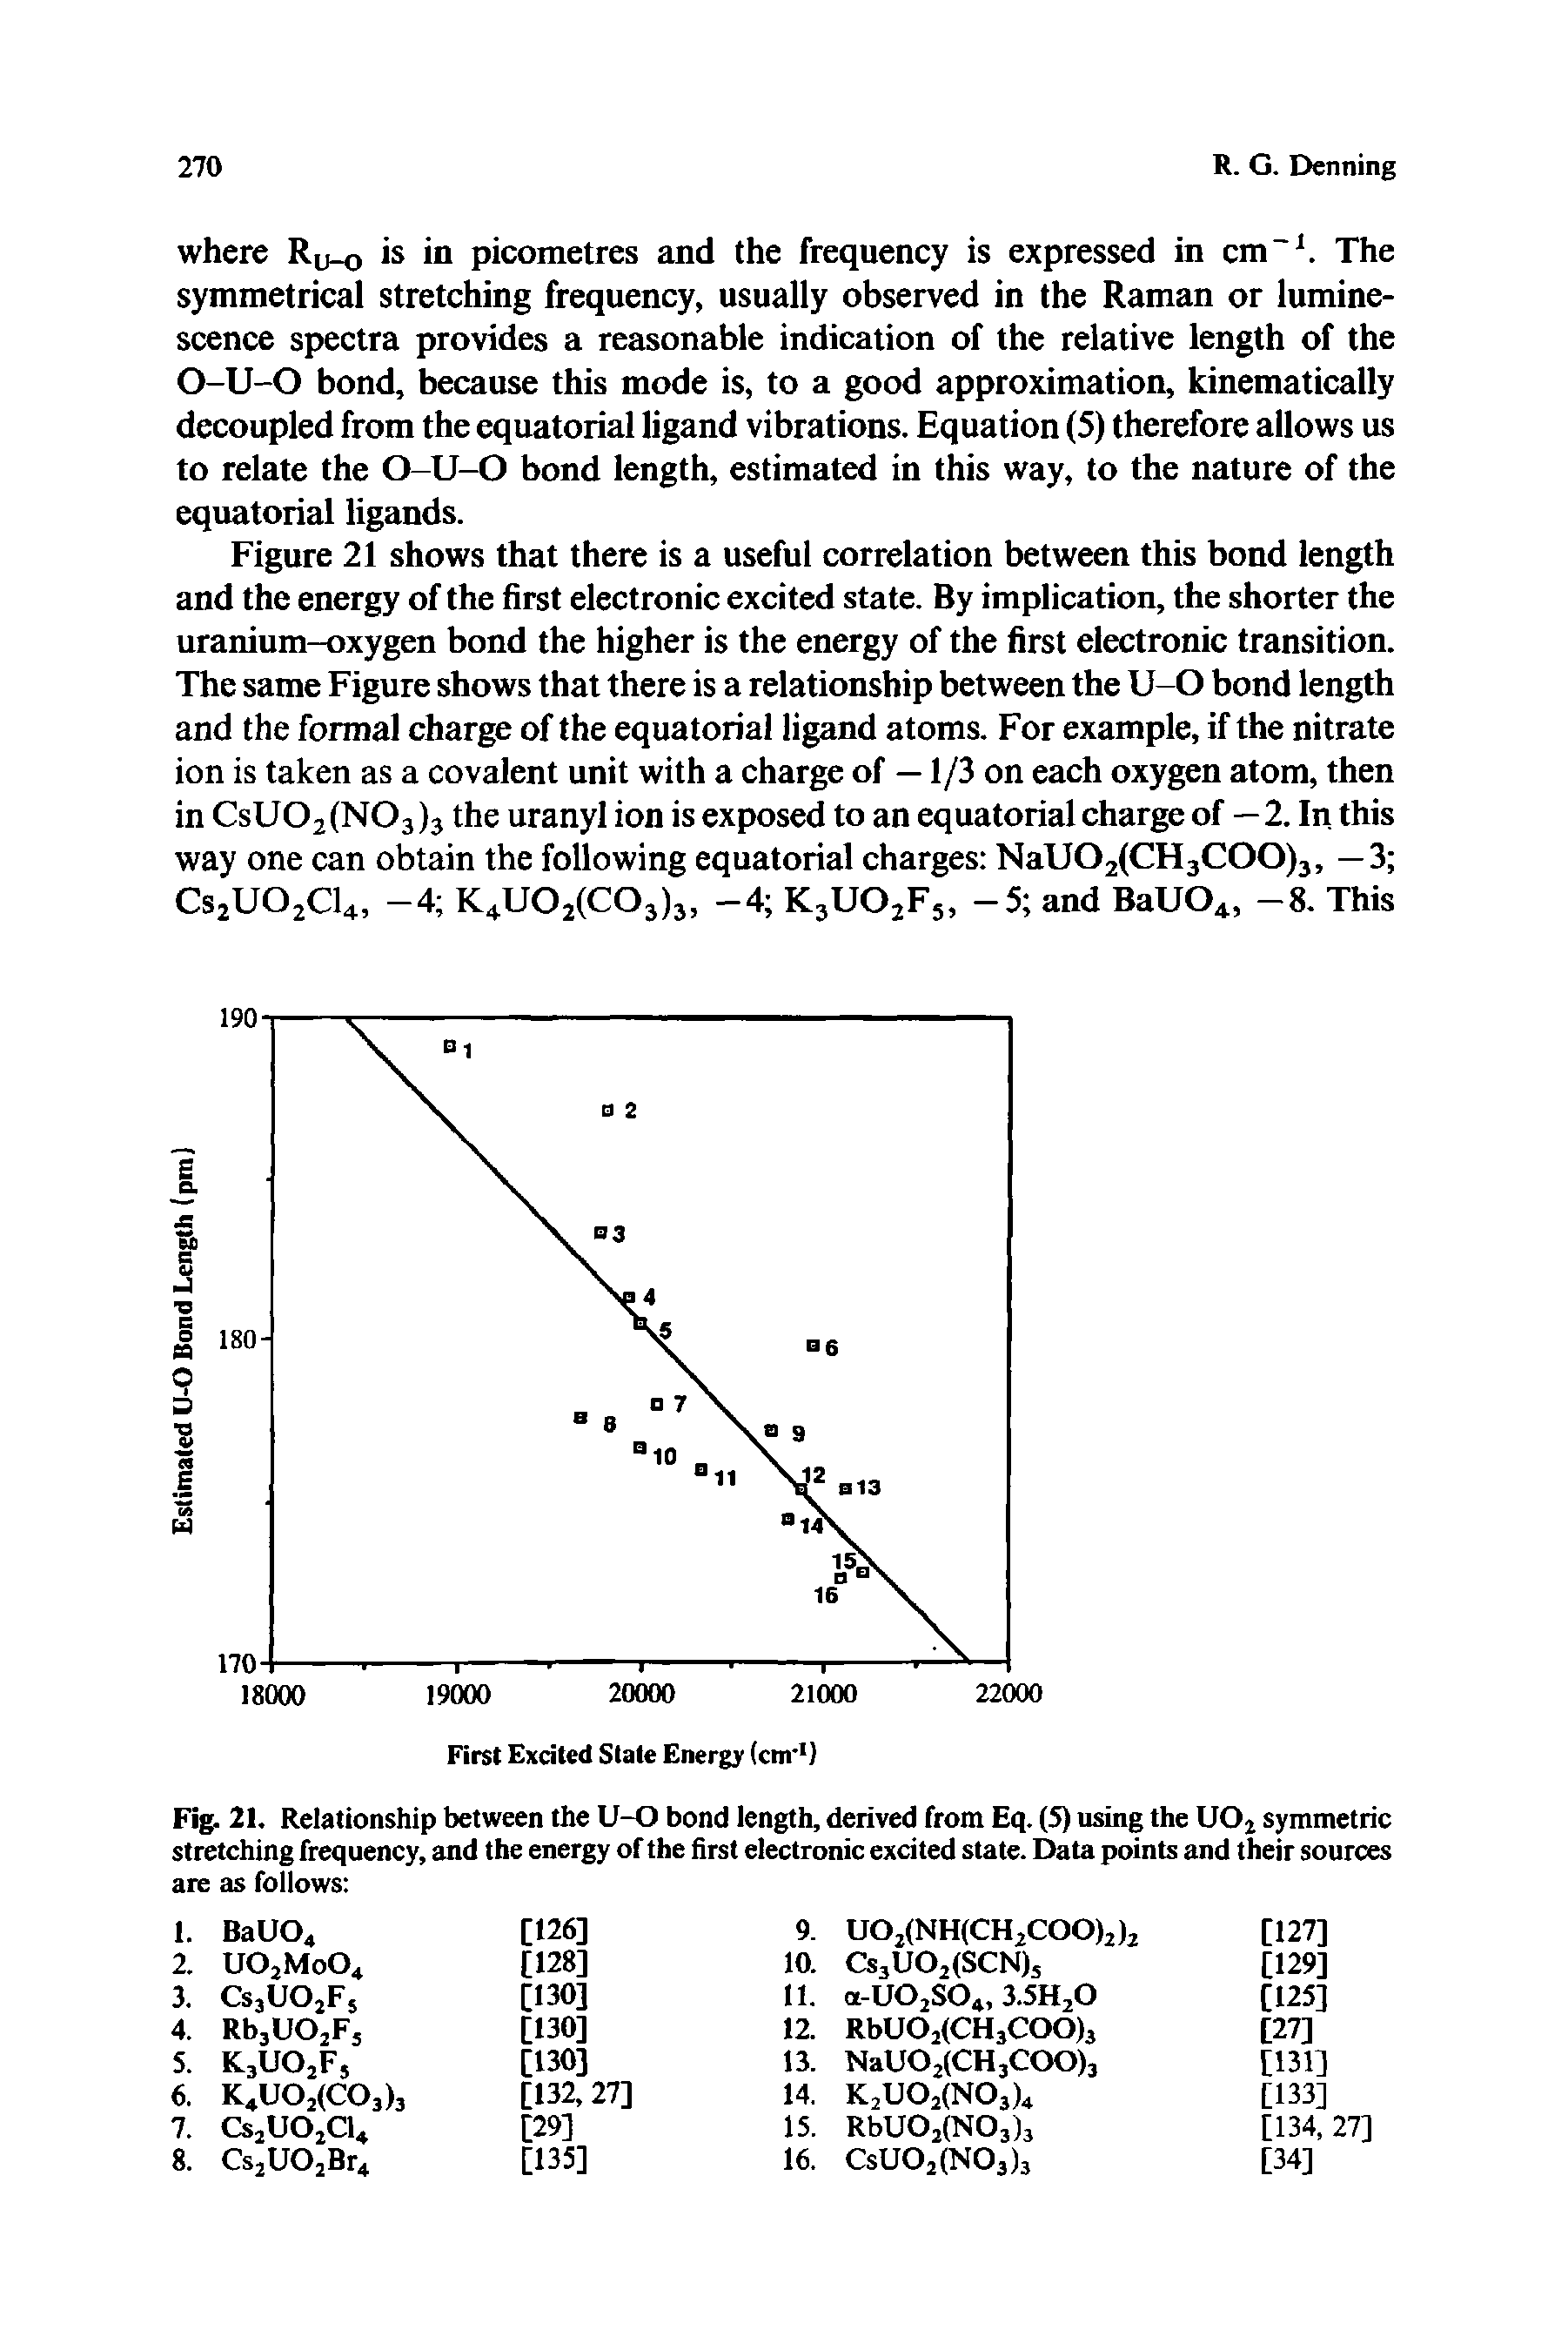 Fig. 21. Relationship between the U-O bond length, derived from Eq. (5) using the U02 symmetric stretching frequency, and the energy of the first electronic excited state. Data points and their sources are as follows ...